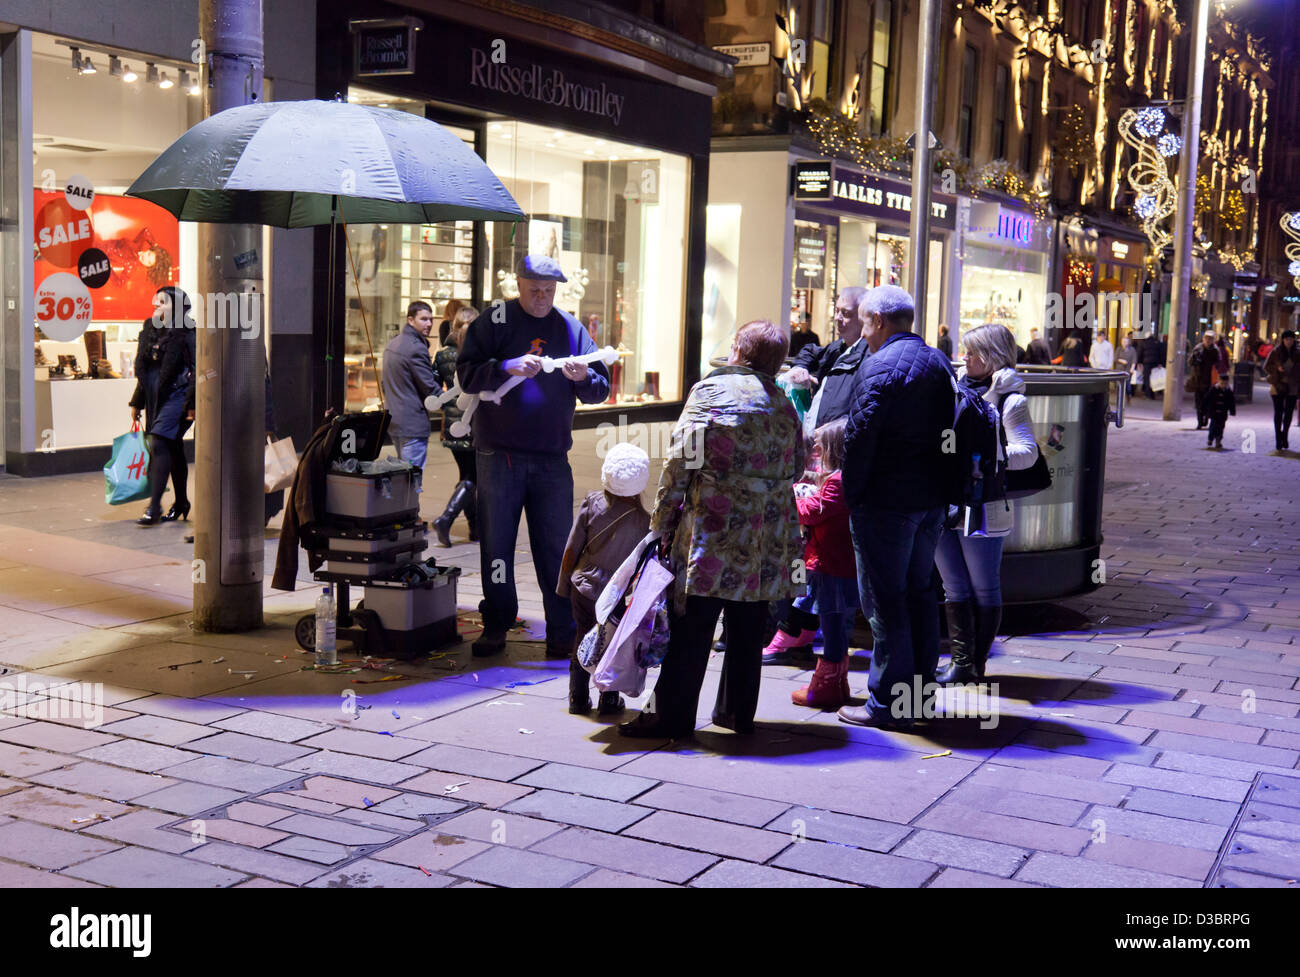 A group of people, adults and children, watch a balloon sculptor in Buchanan Street, in central Glasgow Stock Photo